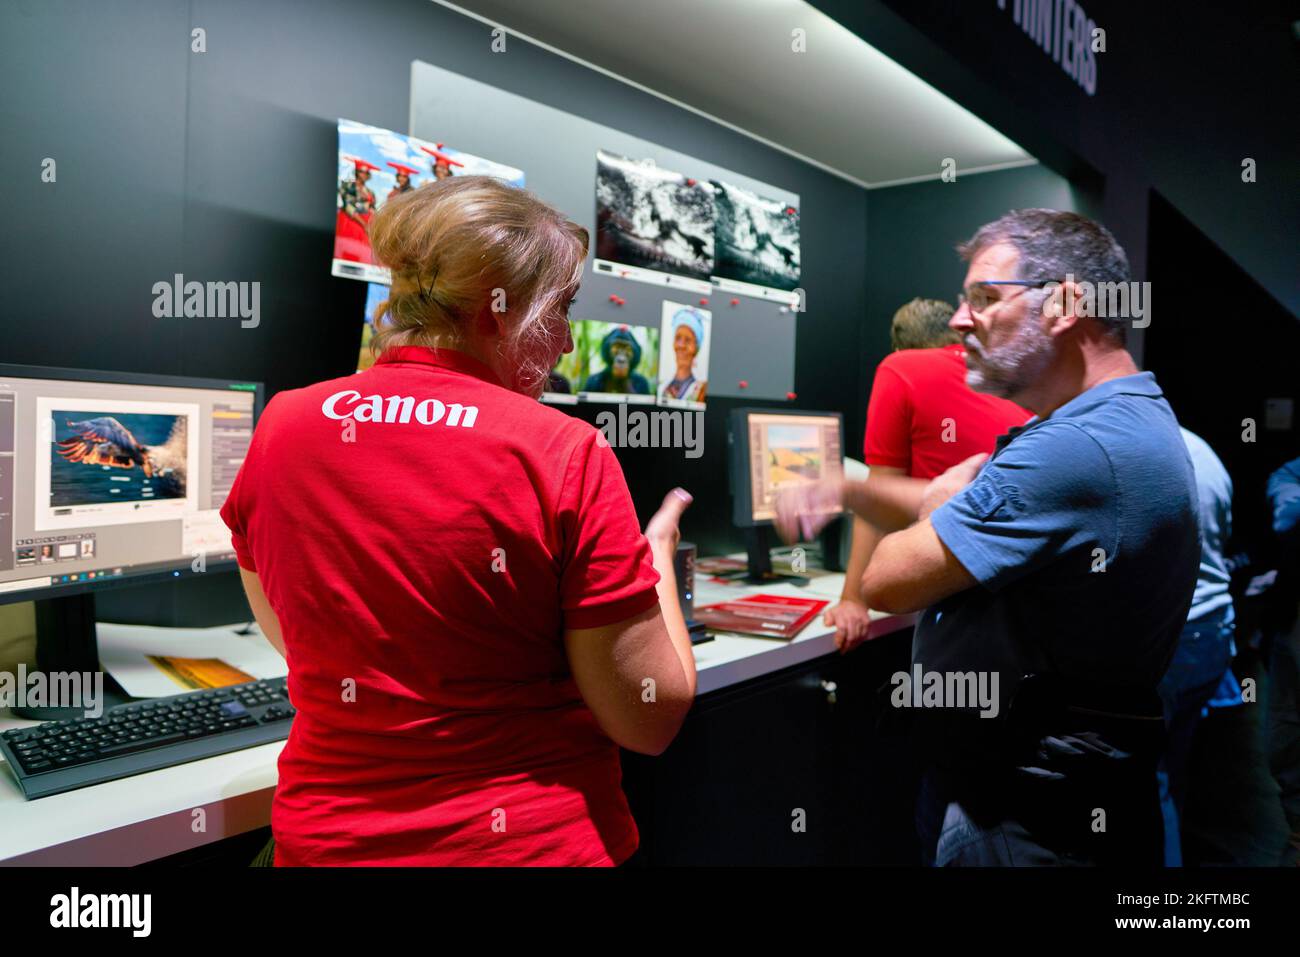 COLOGNE, GERMANY - CIRCA SEPTEMBER, 2018: Canon sign seen on red T-shirt of staff at the Photokina Exhibition. Photokina is a leading trade fair for t Stock Photo